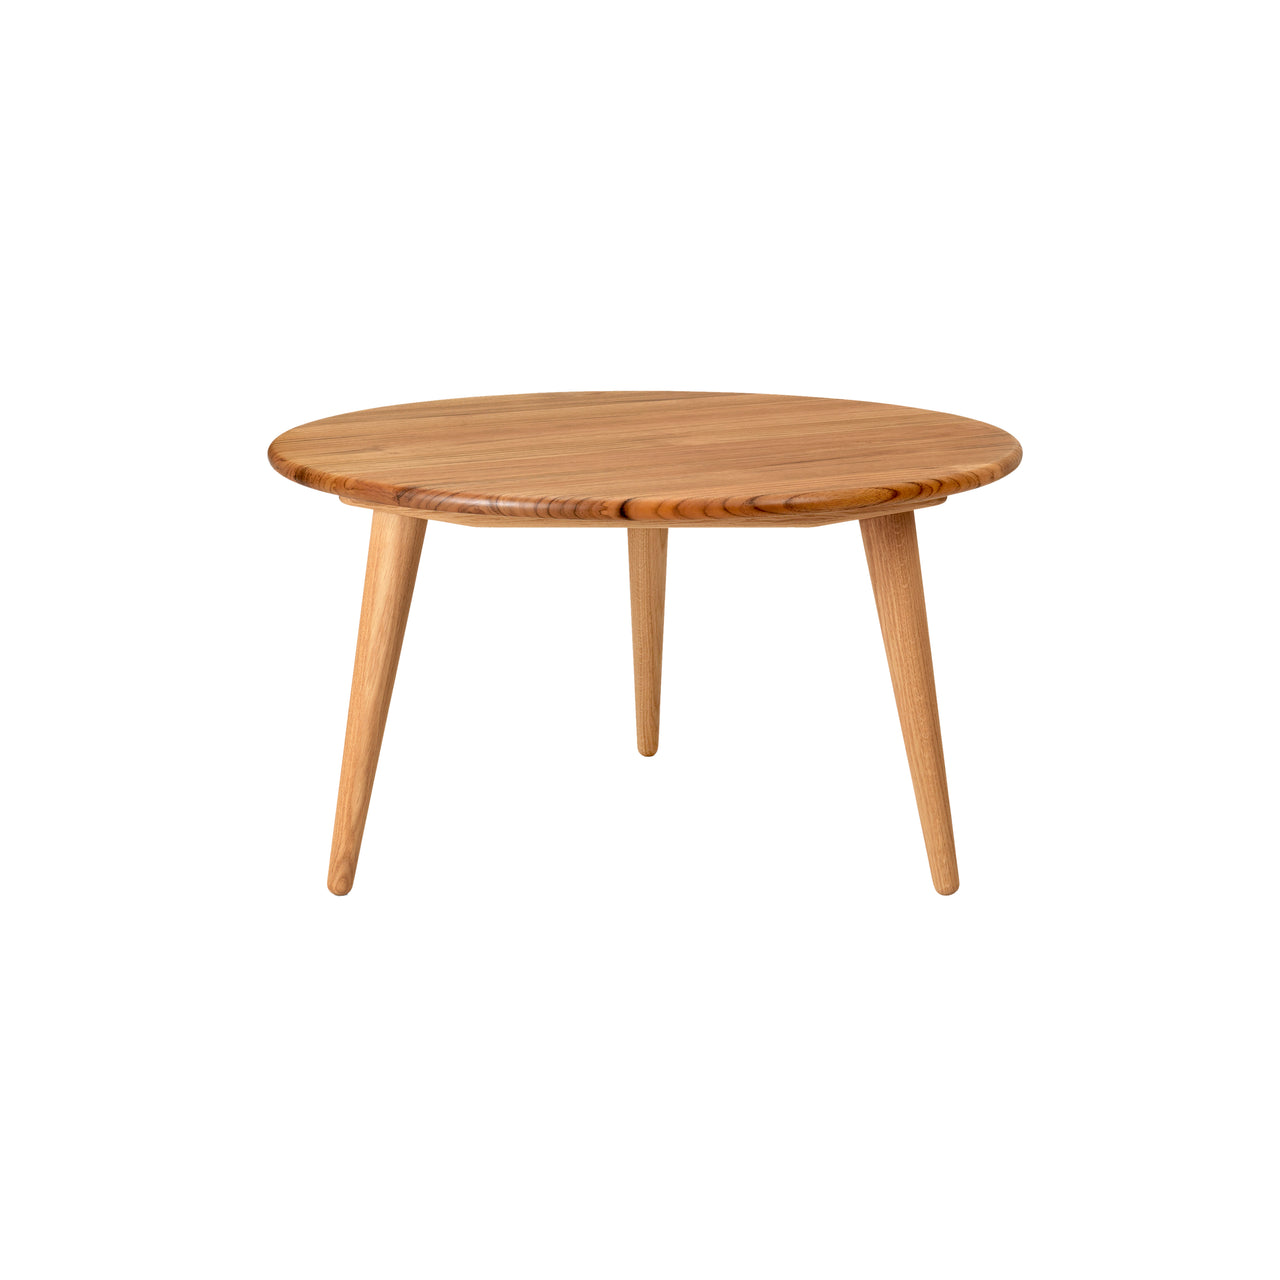 CH008 Coffee Table: Small - 30.7